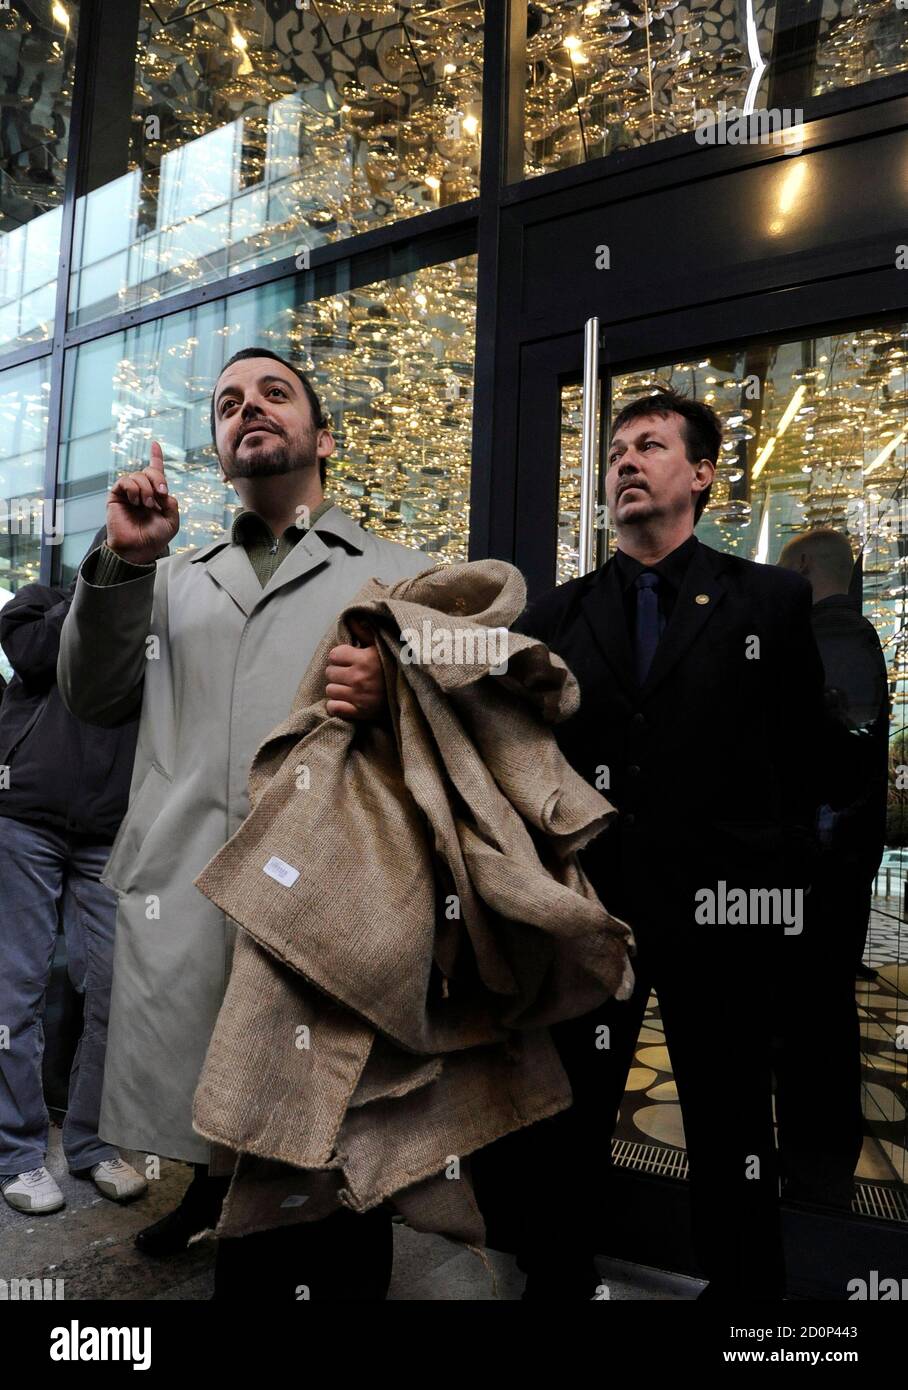 Civil activist Eduard Chmelar (L) holds sacks as he asks for money in front of the headquarters of the J&T financial group during a protest against oligarchy, corruption, and the greed of banks, developers and transnational corporations in Bratislava October 24, 2011. Members of the initiative for the Civil Constitution symbolically occupied the entrance to the building and asked for money for citizens.   REUTERS/Radovan Stoklasa (SLOVAKIA - Tags: BUSINESS CIVIL UNREST) Stock Photo